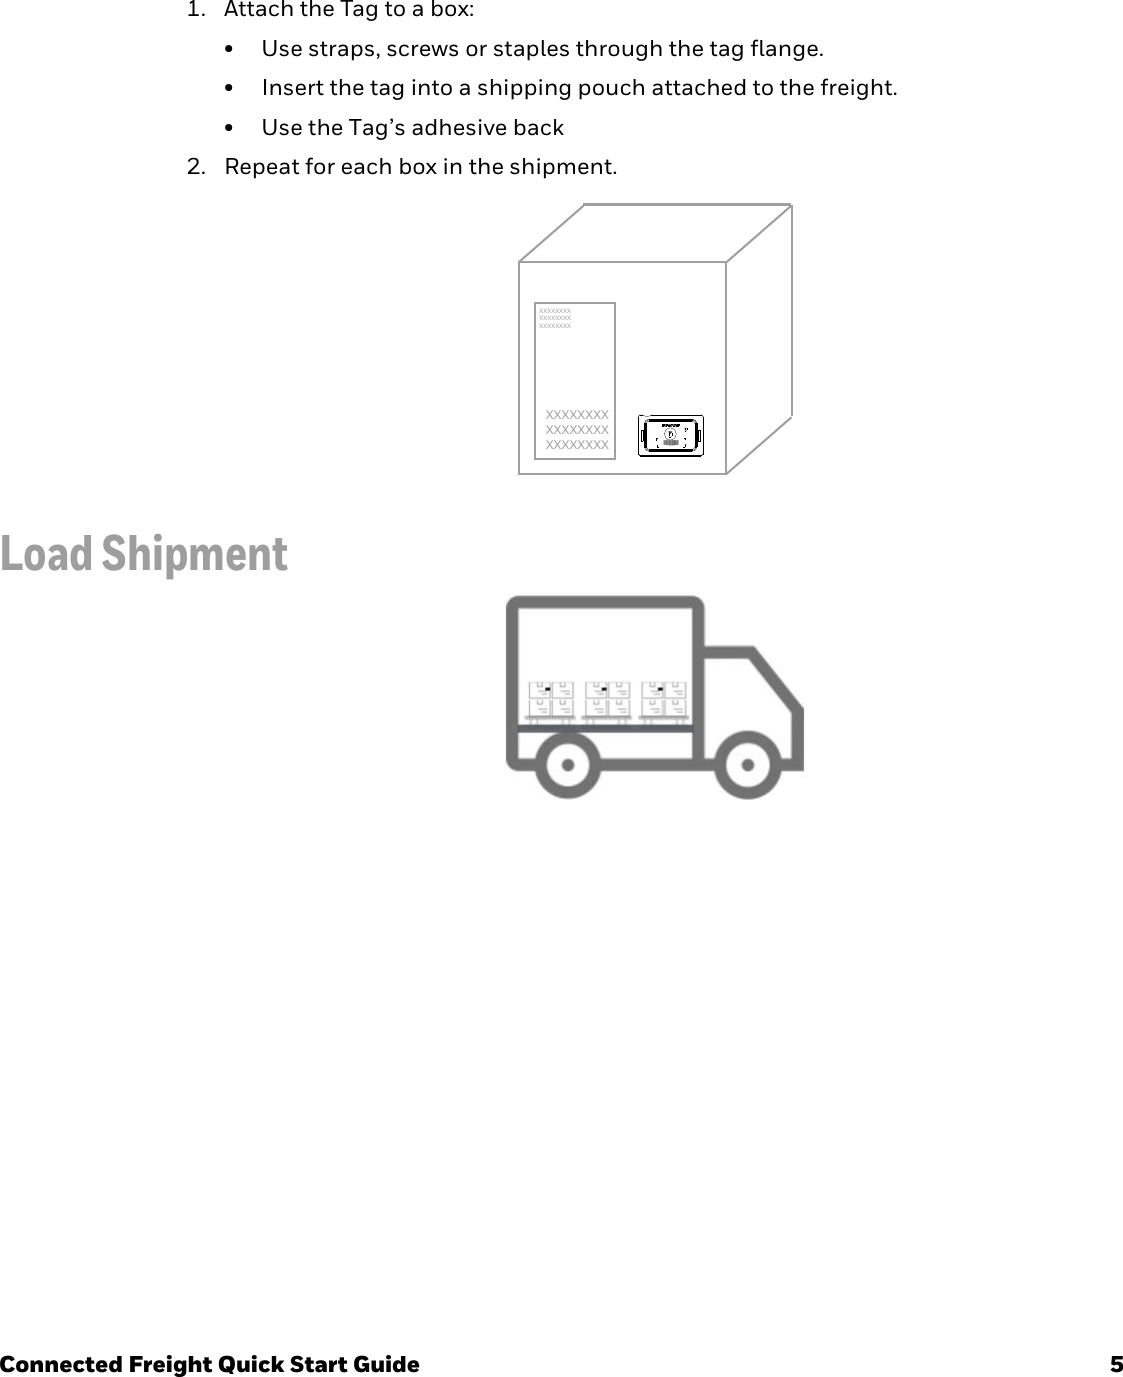 Connected Freight Quick Start Guide 5Attach Tag1. Attach the Tag to a box:• Use straps, screws or staples through the tag flange.• Insert the tag into a shipping pouch attached to the freight.• Use the Tag’s adhesive back2. Repeat for each box in the shipment.Load ShipmentXXXXXXXXXXXXXXXXXXXXXXXXXXXXXXXXXXXXXXXXXXXXXXXX;;;;;;;;;;XXXXXXXXXX